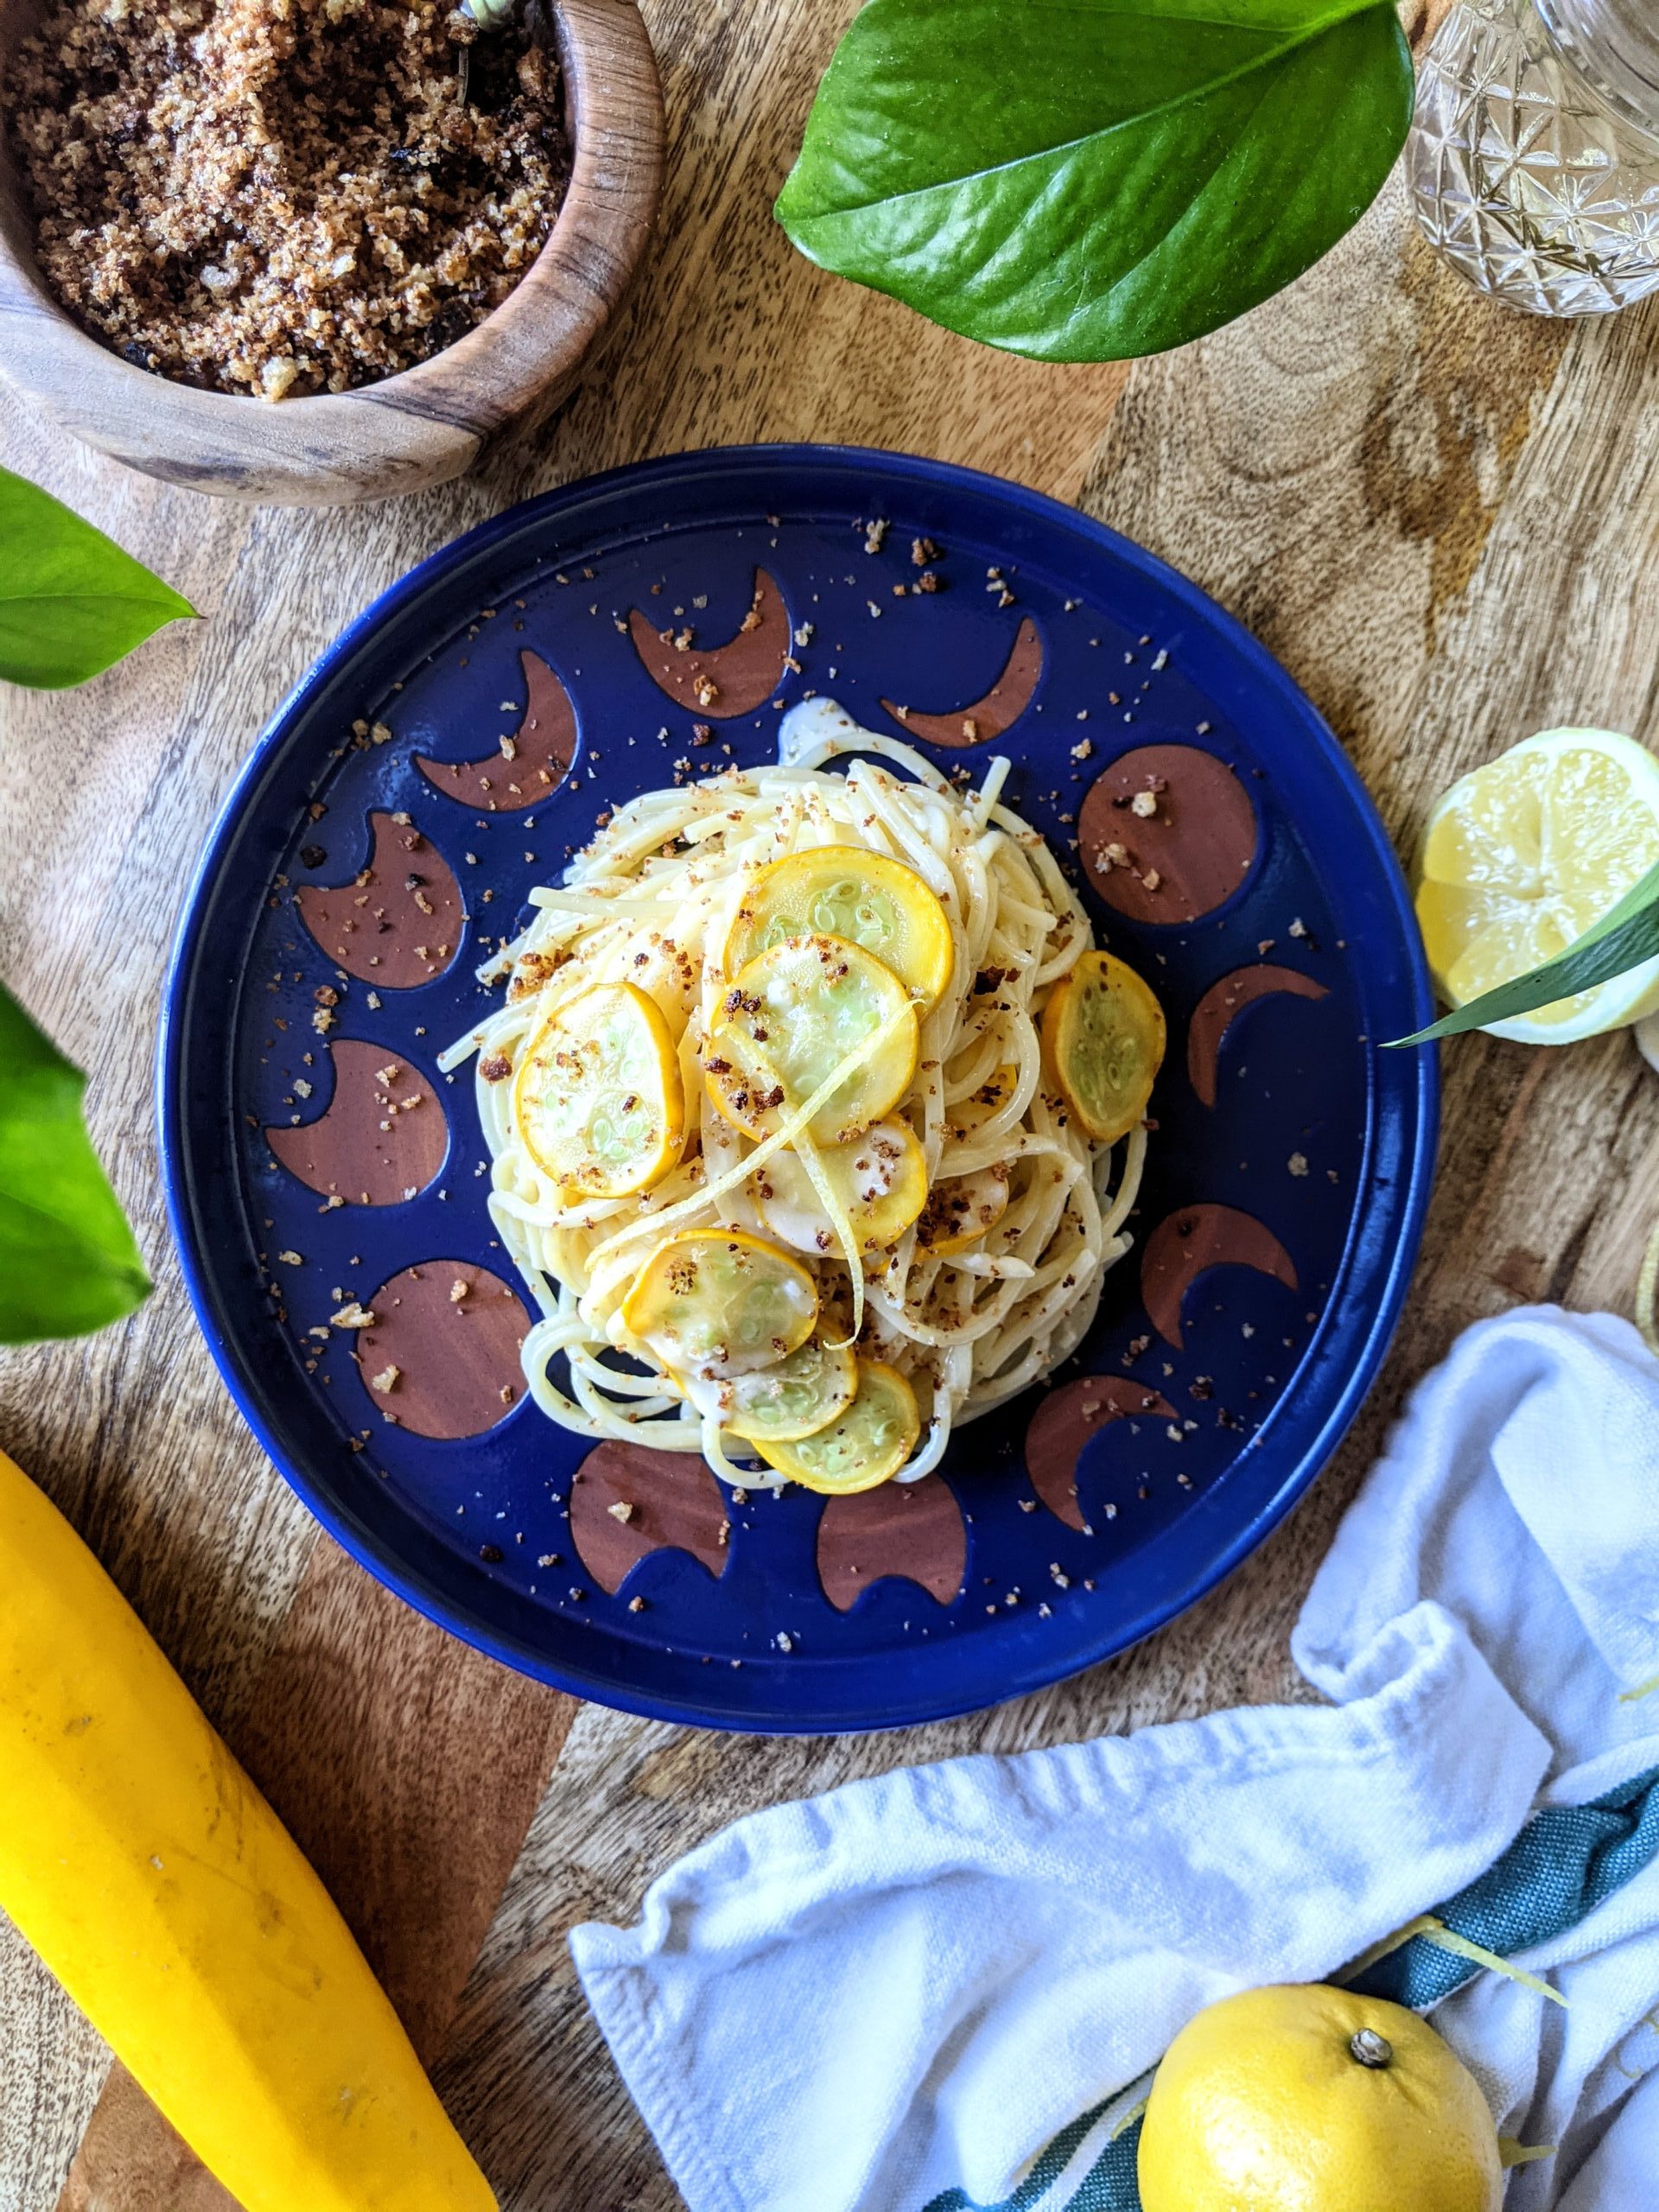 A nest of spaghetti tossed in a lemon cream sauce with thinly sliced zucchini rounds throughout. Served with homemade habanero breadcrumbs and lemon wedges.